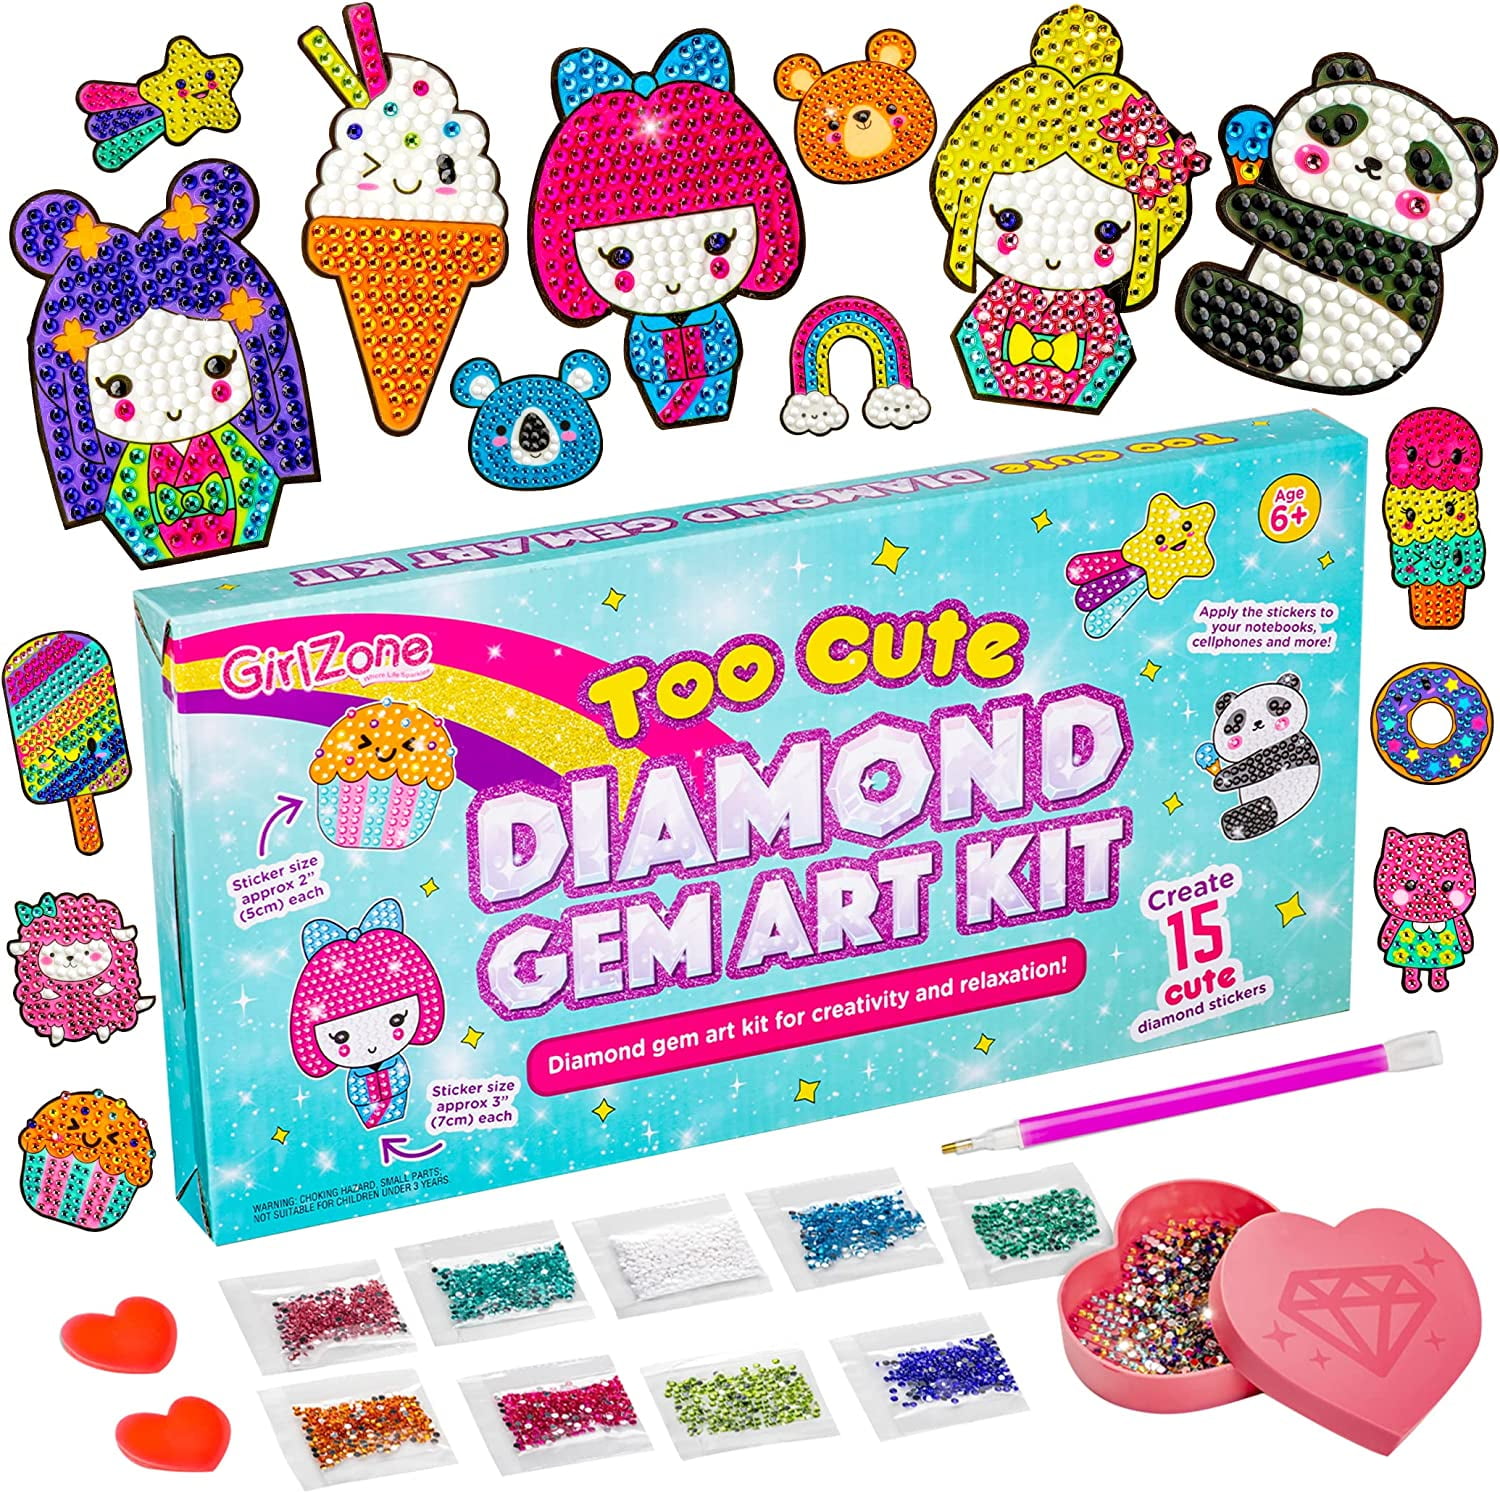 Chalky Crown 50 Kawaii Diamond Painting Kits with Holographic Stickers - Gem Art for Kids